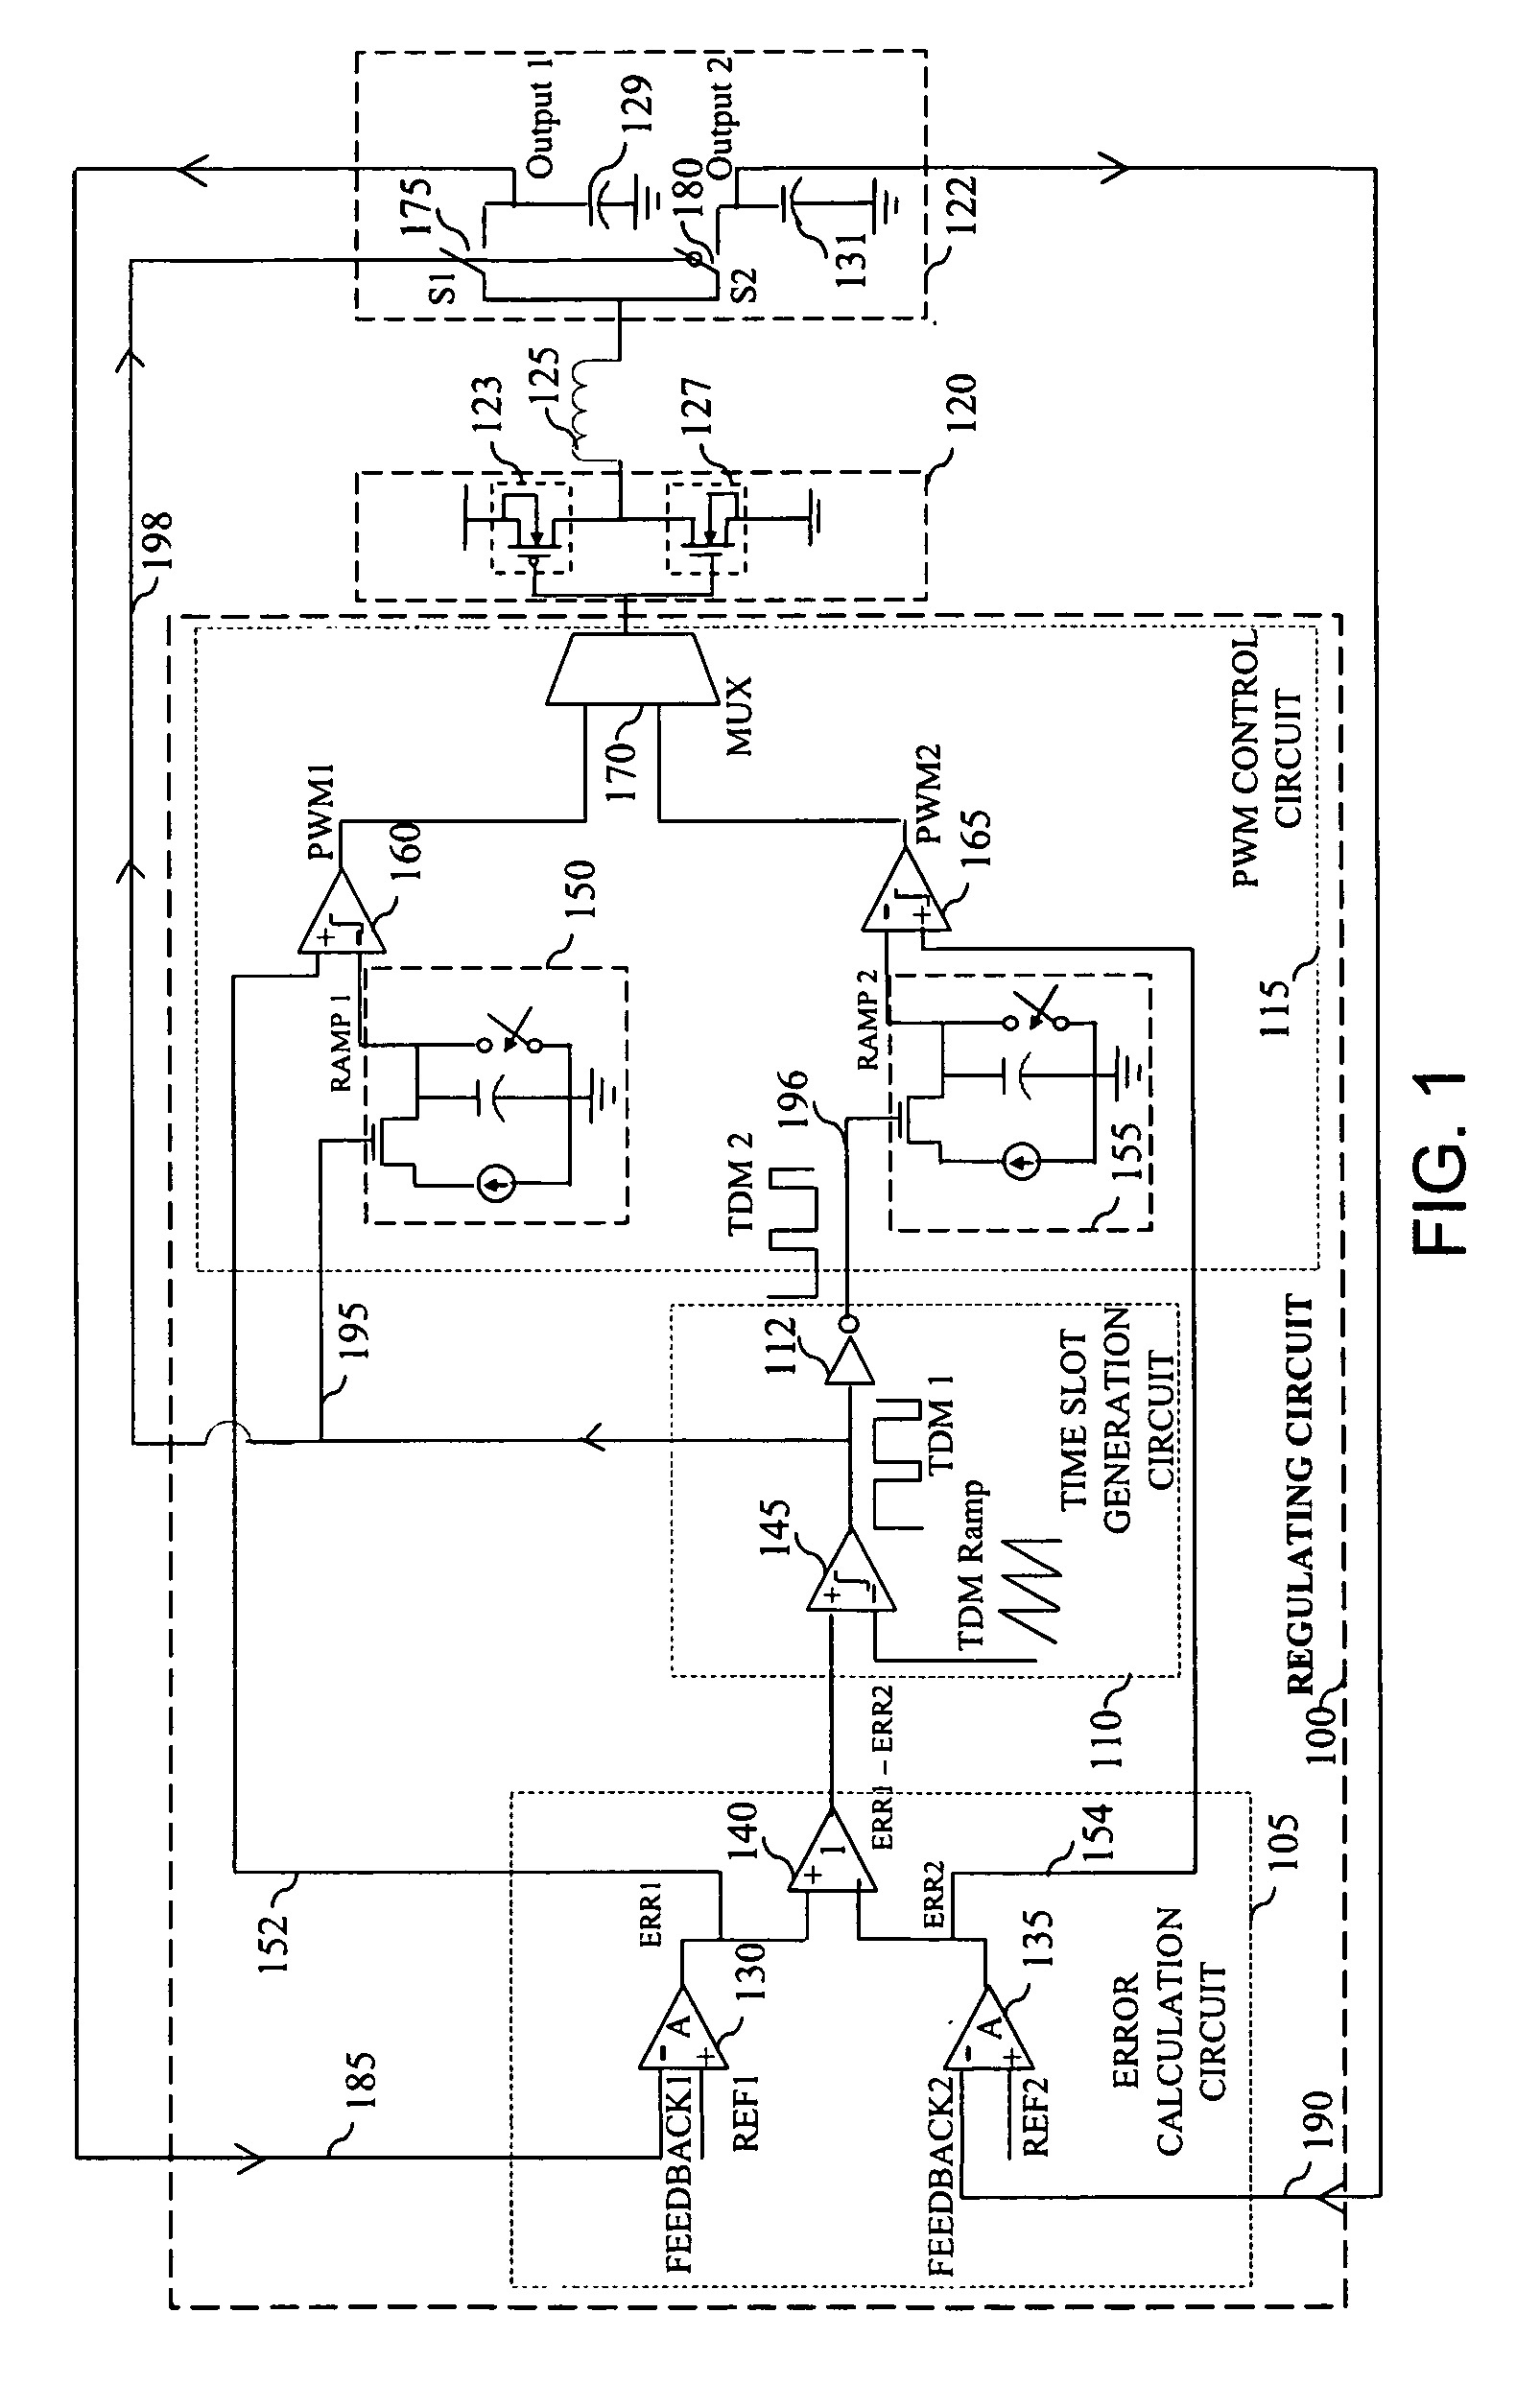 Single inductor multiple output switching devices